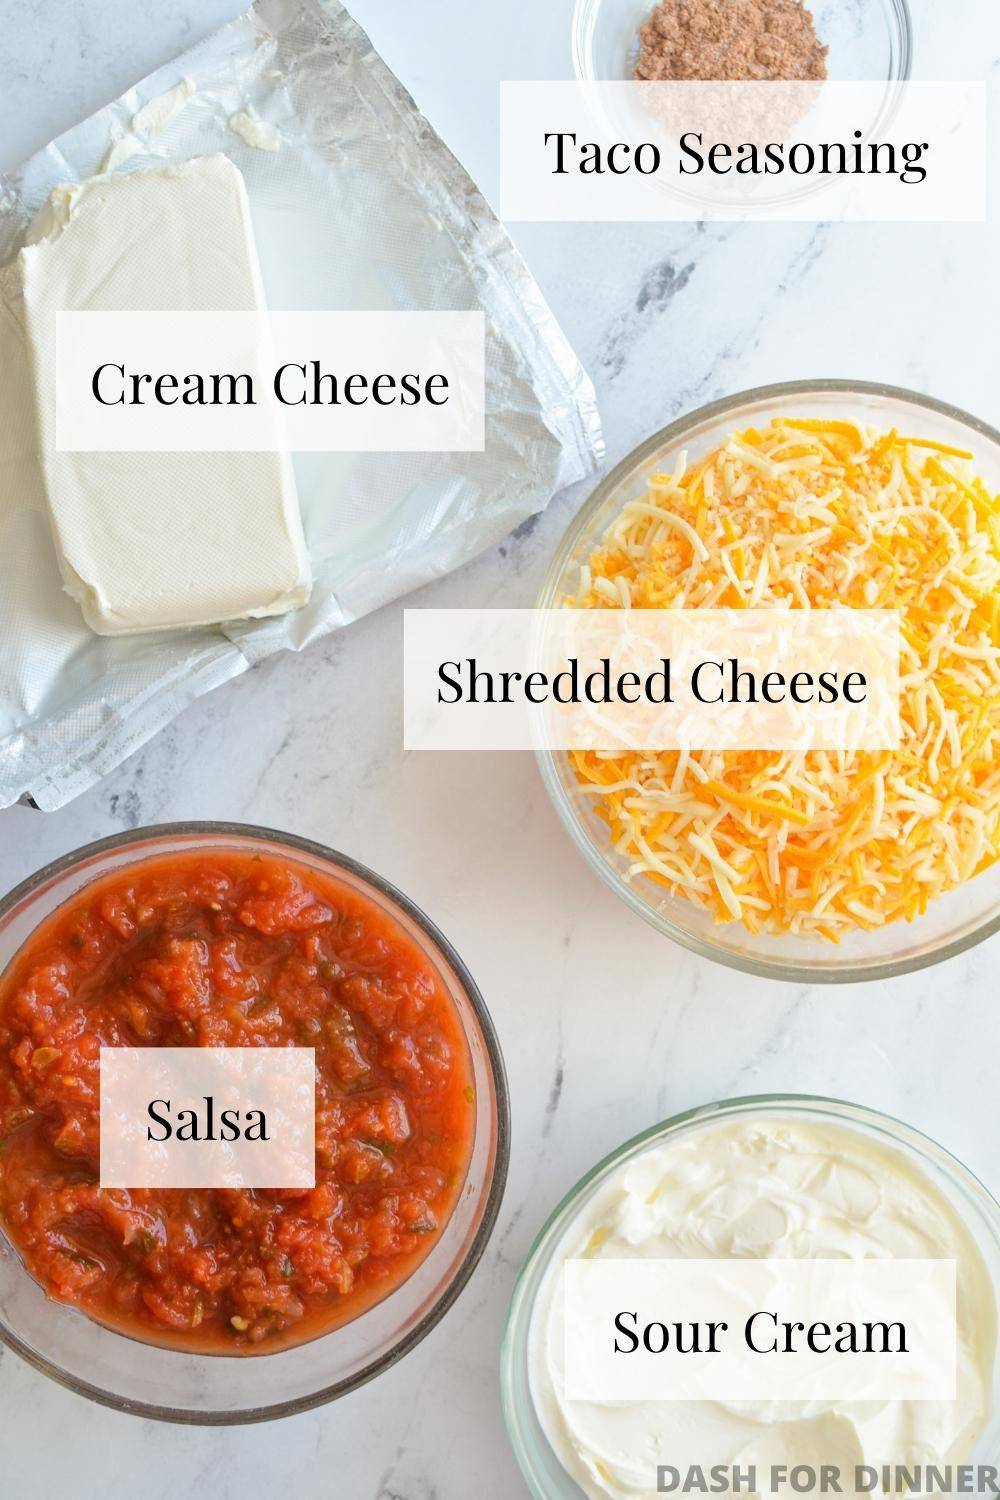 The ingredients needed to make a layered taco dip: cream cheese, salsa, cheese, sour cream, and taco seasoning.